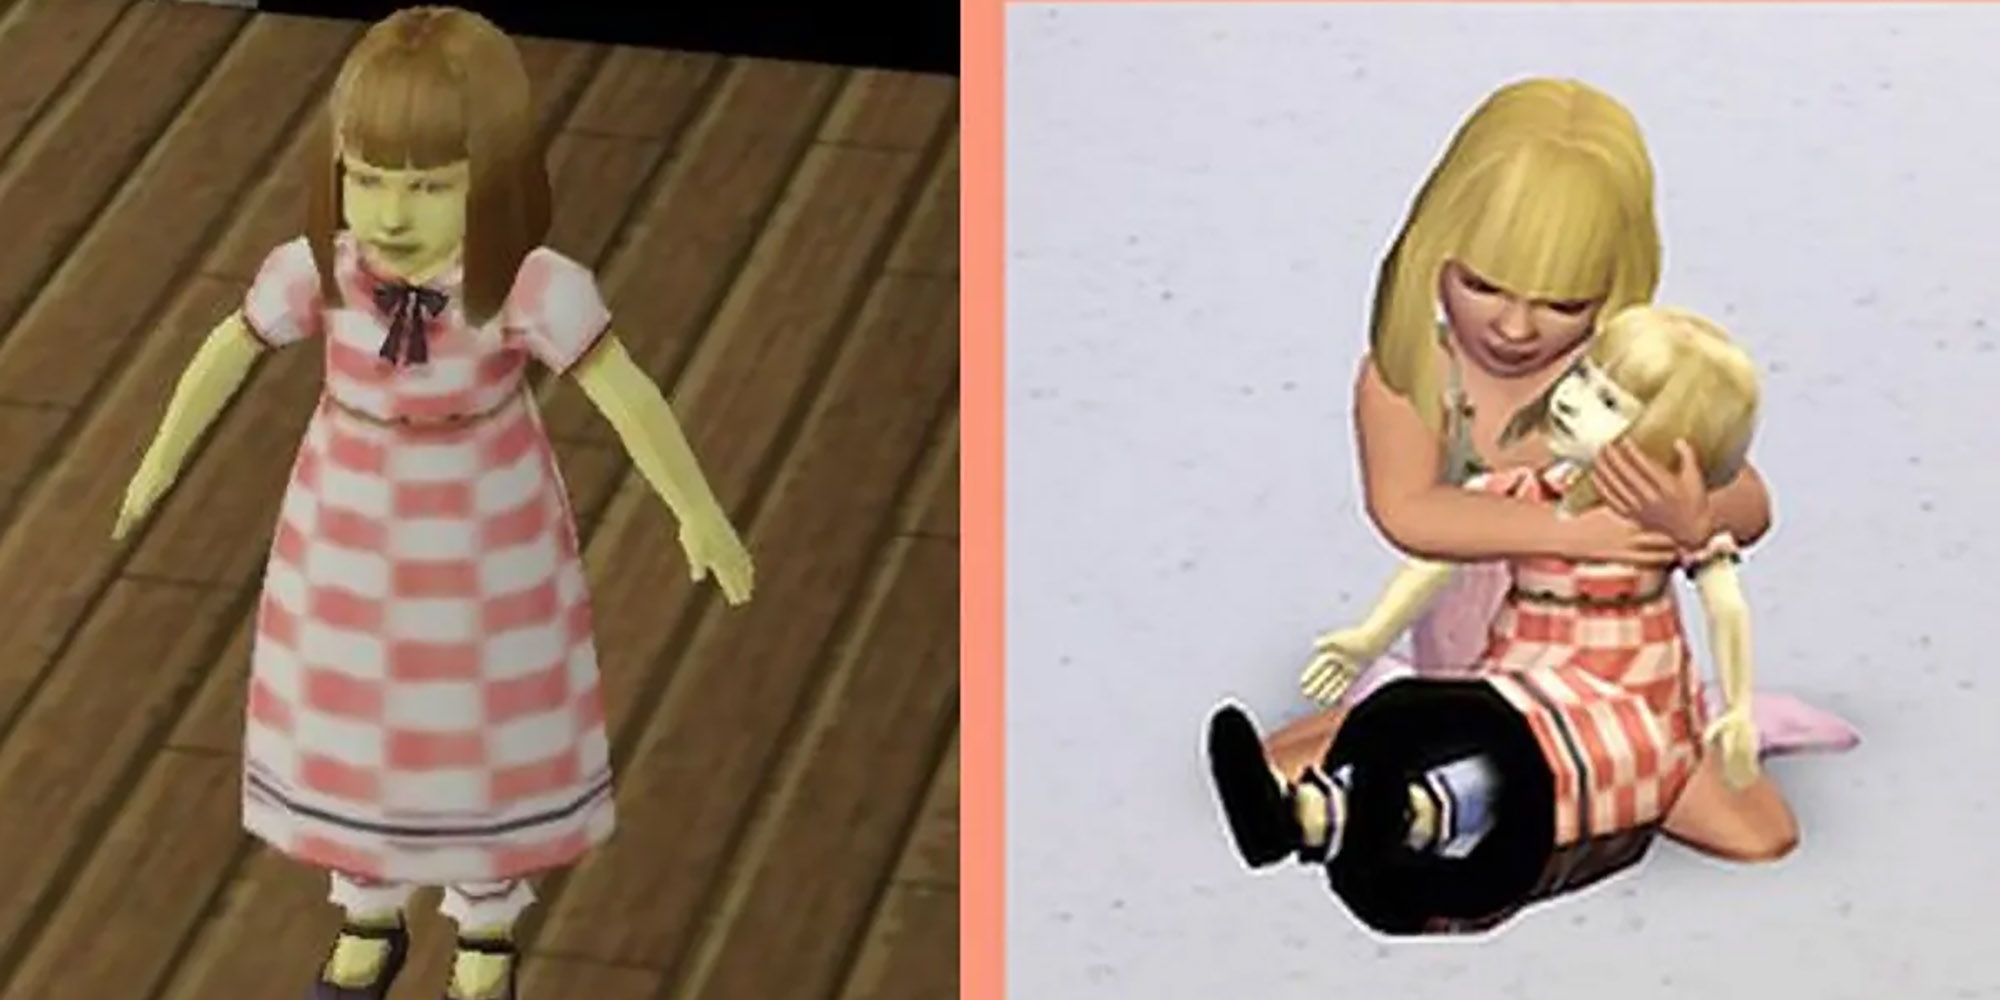 The Sims 3's corrupt Girl Dressed Doll